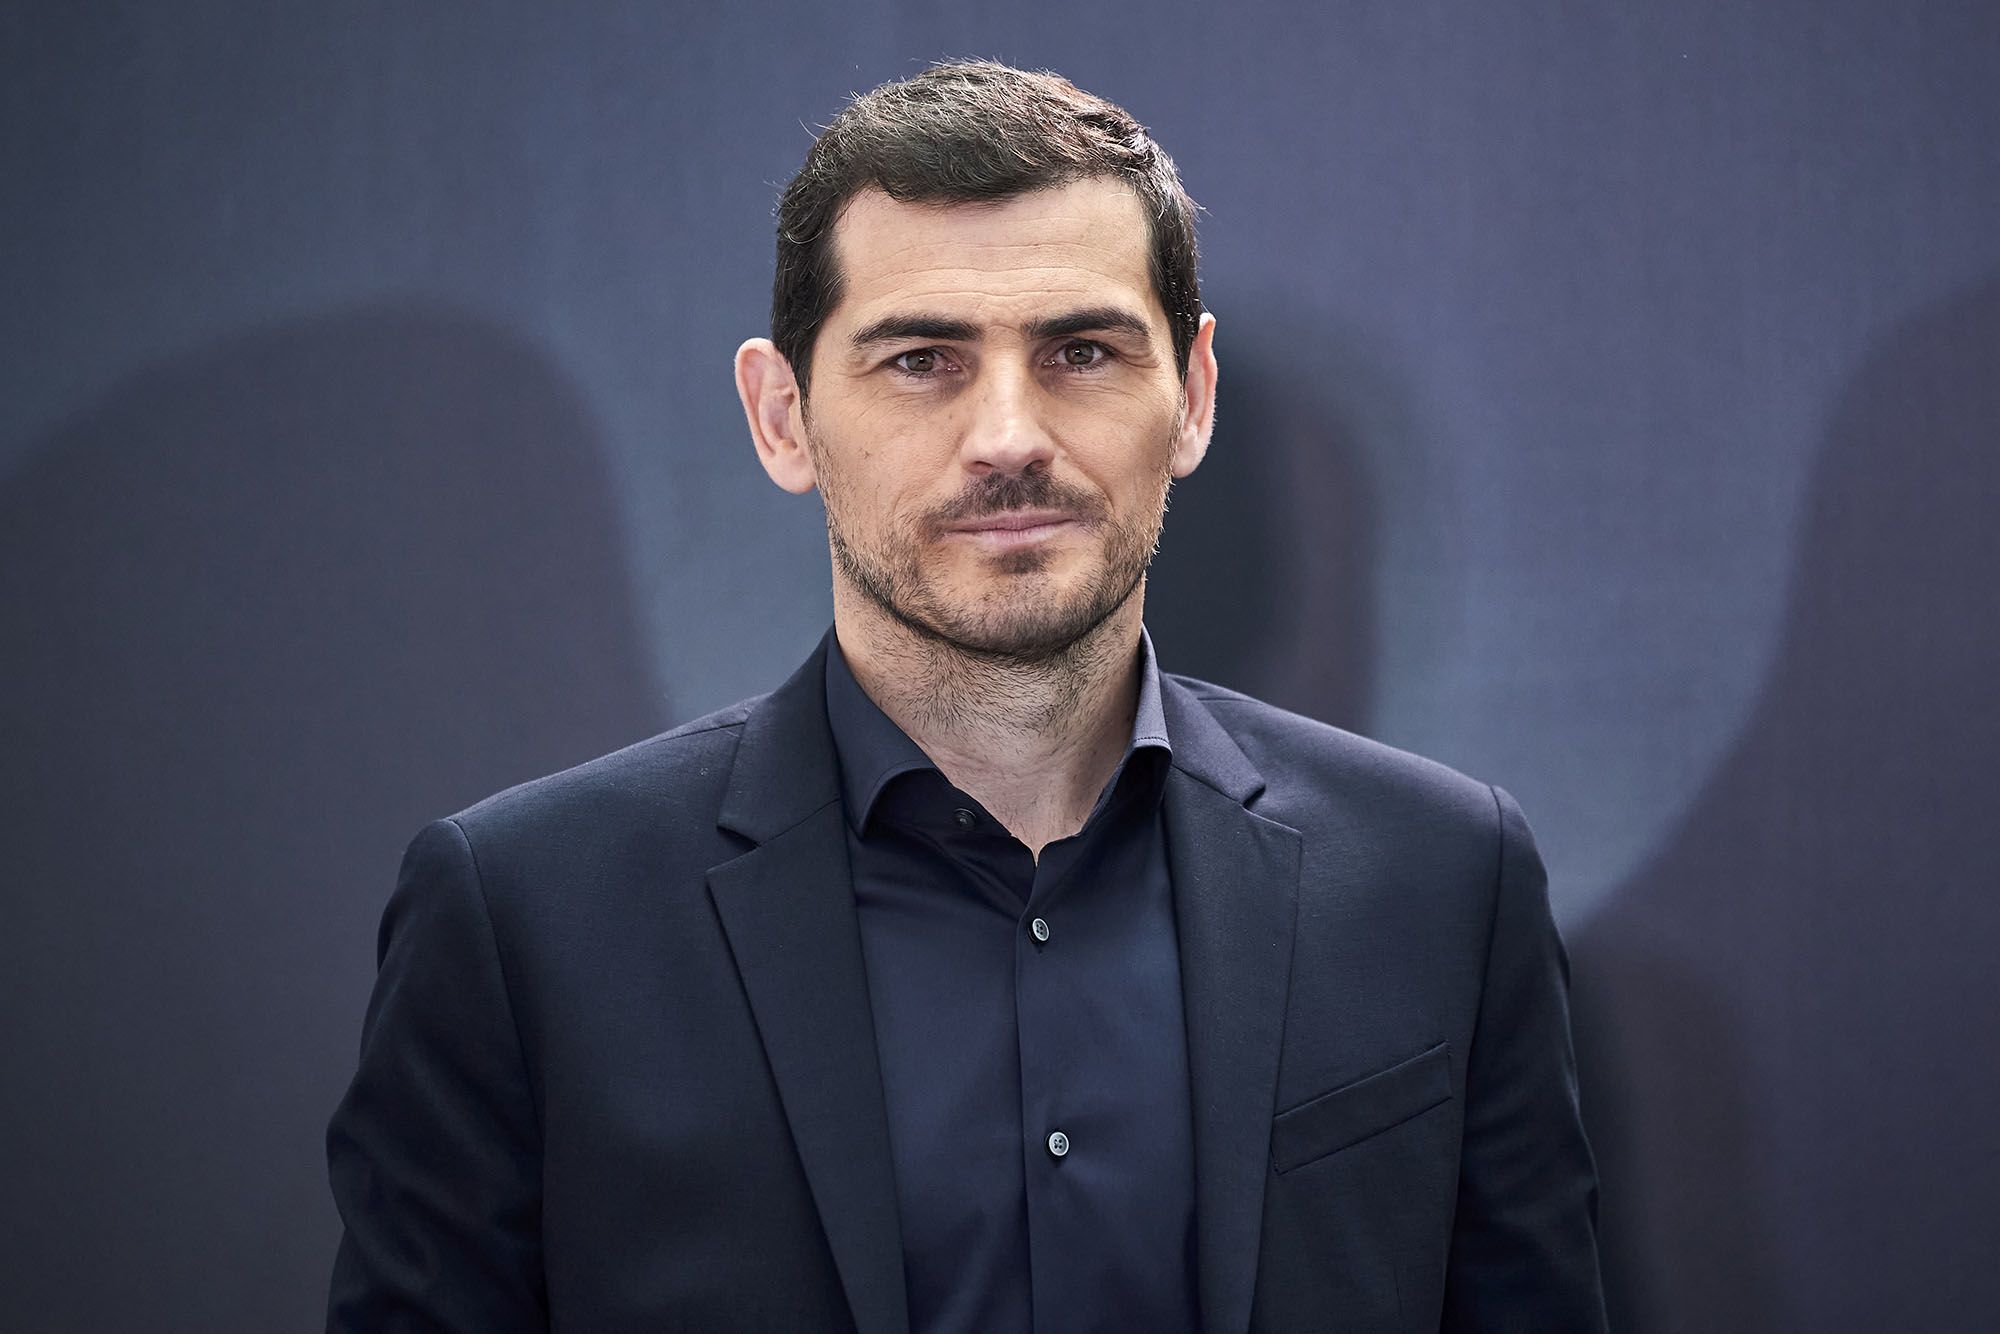 Iker Casillas and Carles Puyol criticized for deleted Twitter posts about  coming out | CNN